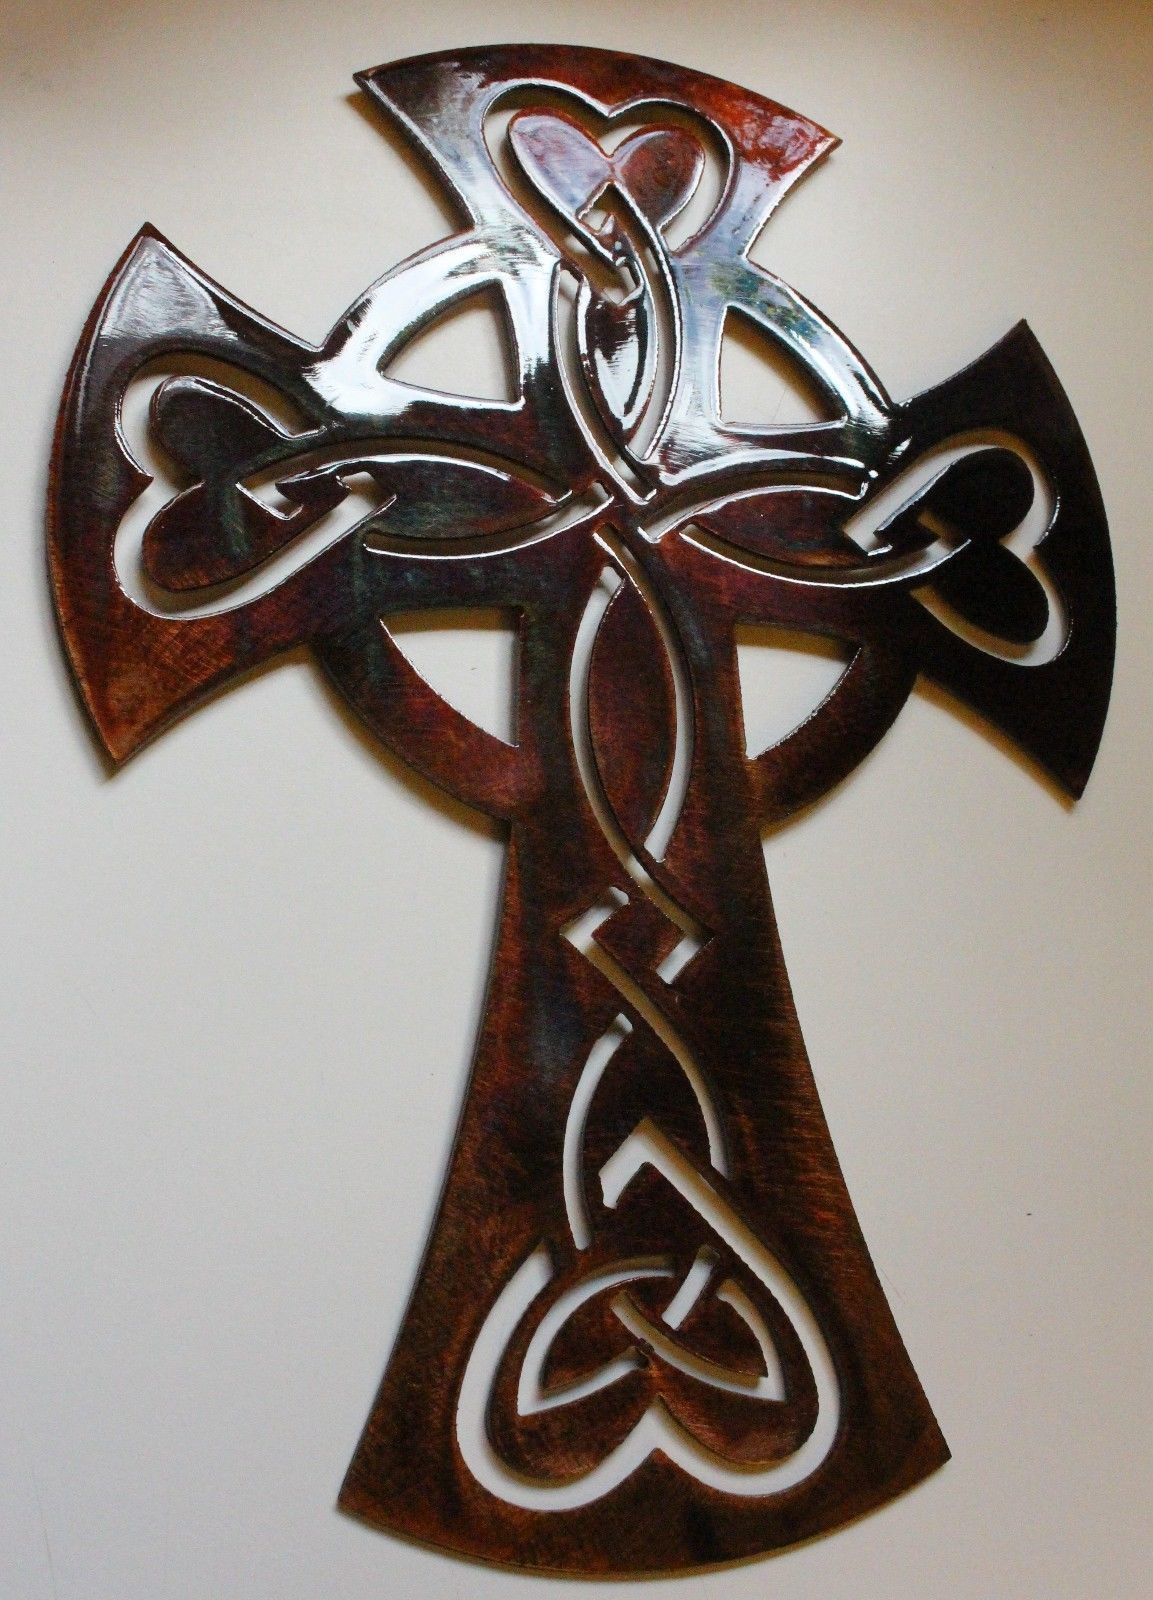 Primary image for Celtic Ornamental Cross - Metal Wall Art - Copper 22"